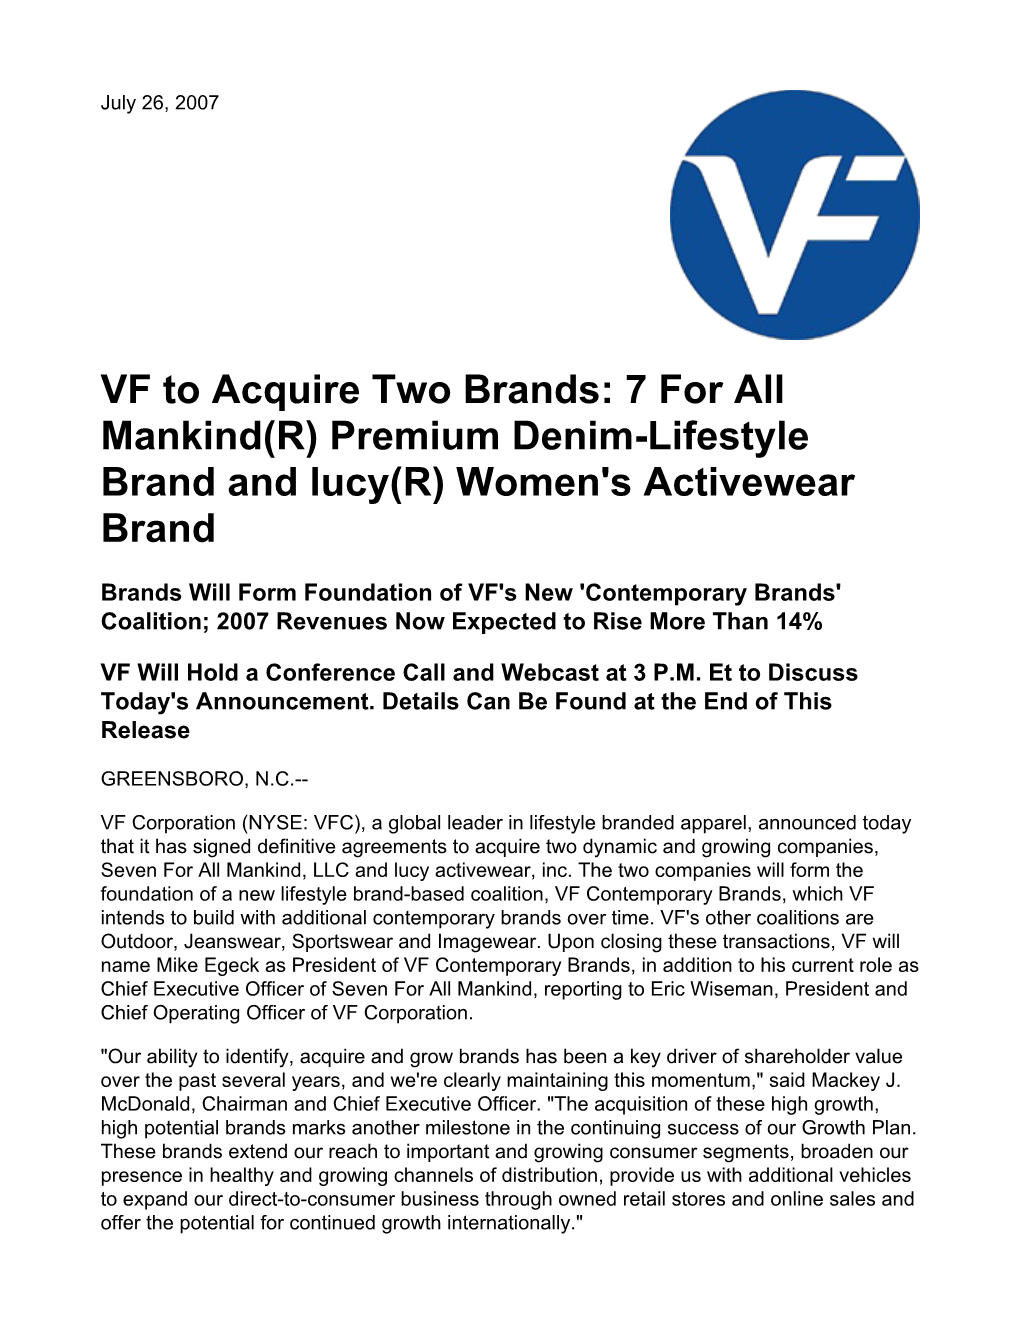 VF to Acquire Two Brands: 7 for All Mankind(R) Premium Denim-Lifestyle Brand and Lucy(R) Women's Activewear Brand